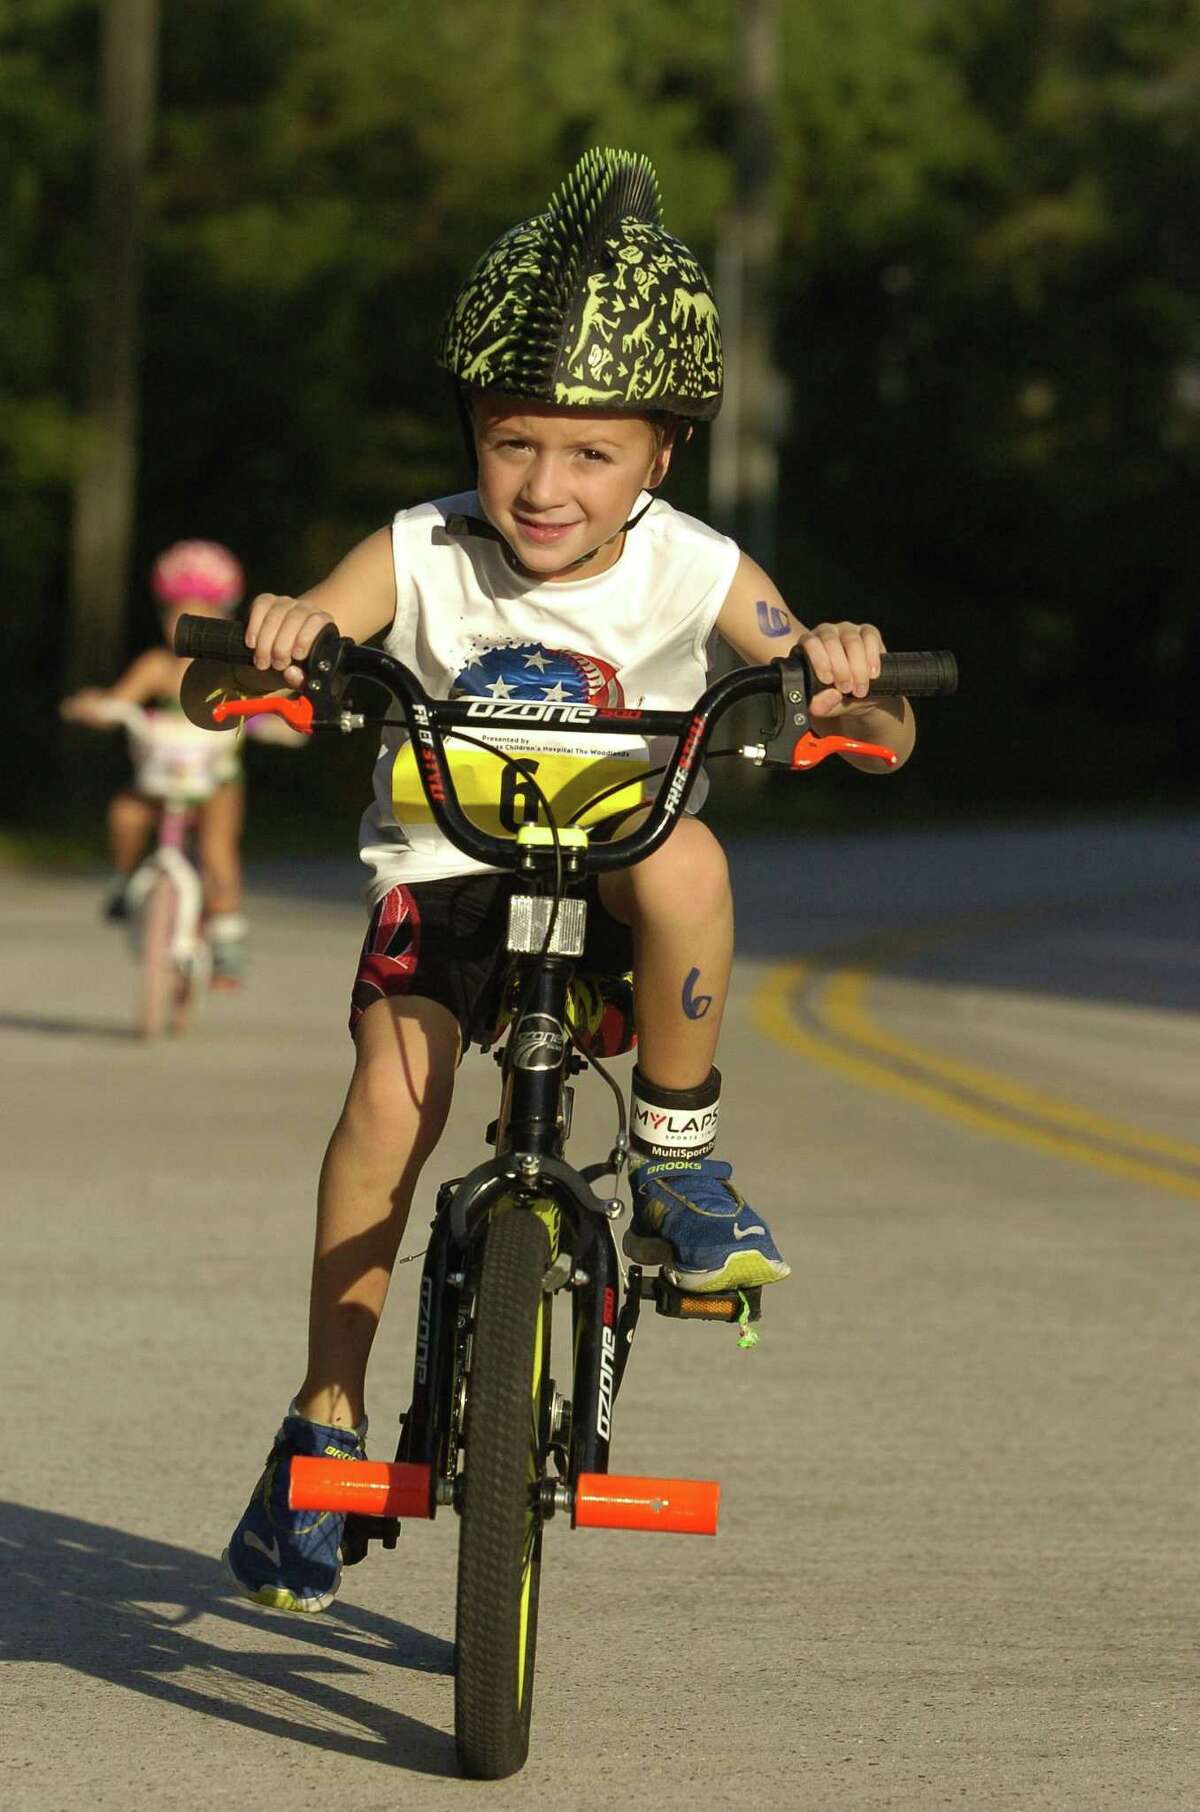 Swim+Bike+Run = FUN! Triathlon is an exciting sport for young children because it involves three activities that every child enjoys ?– swimming, cycling and running. Triathlon is an individual event with segments running consecutively until all three elements are completed.